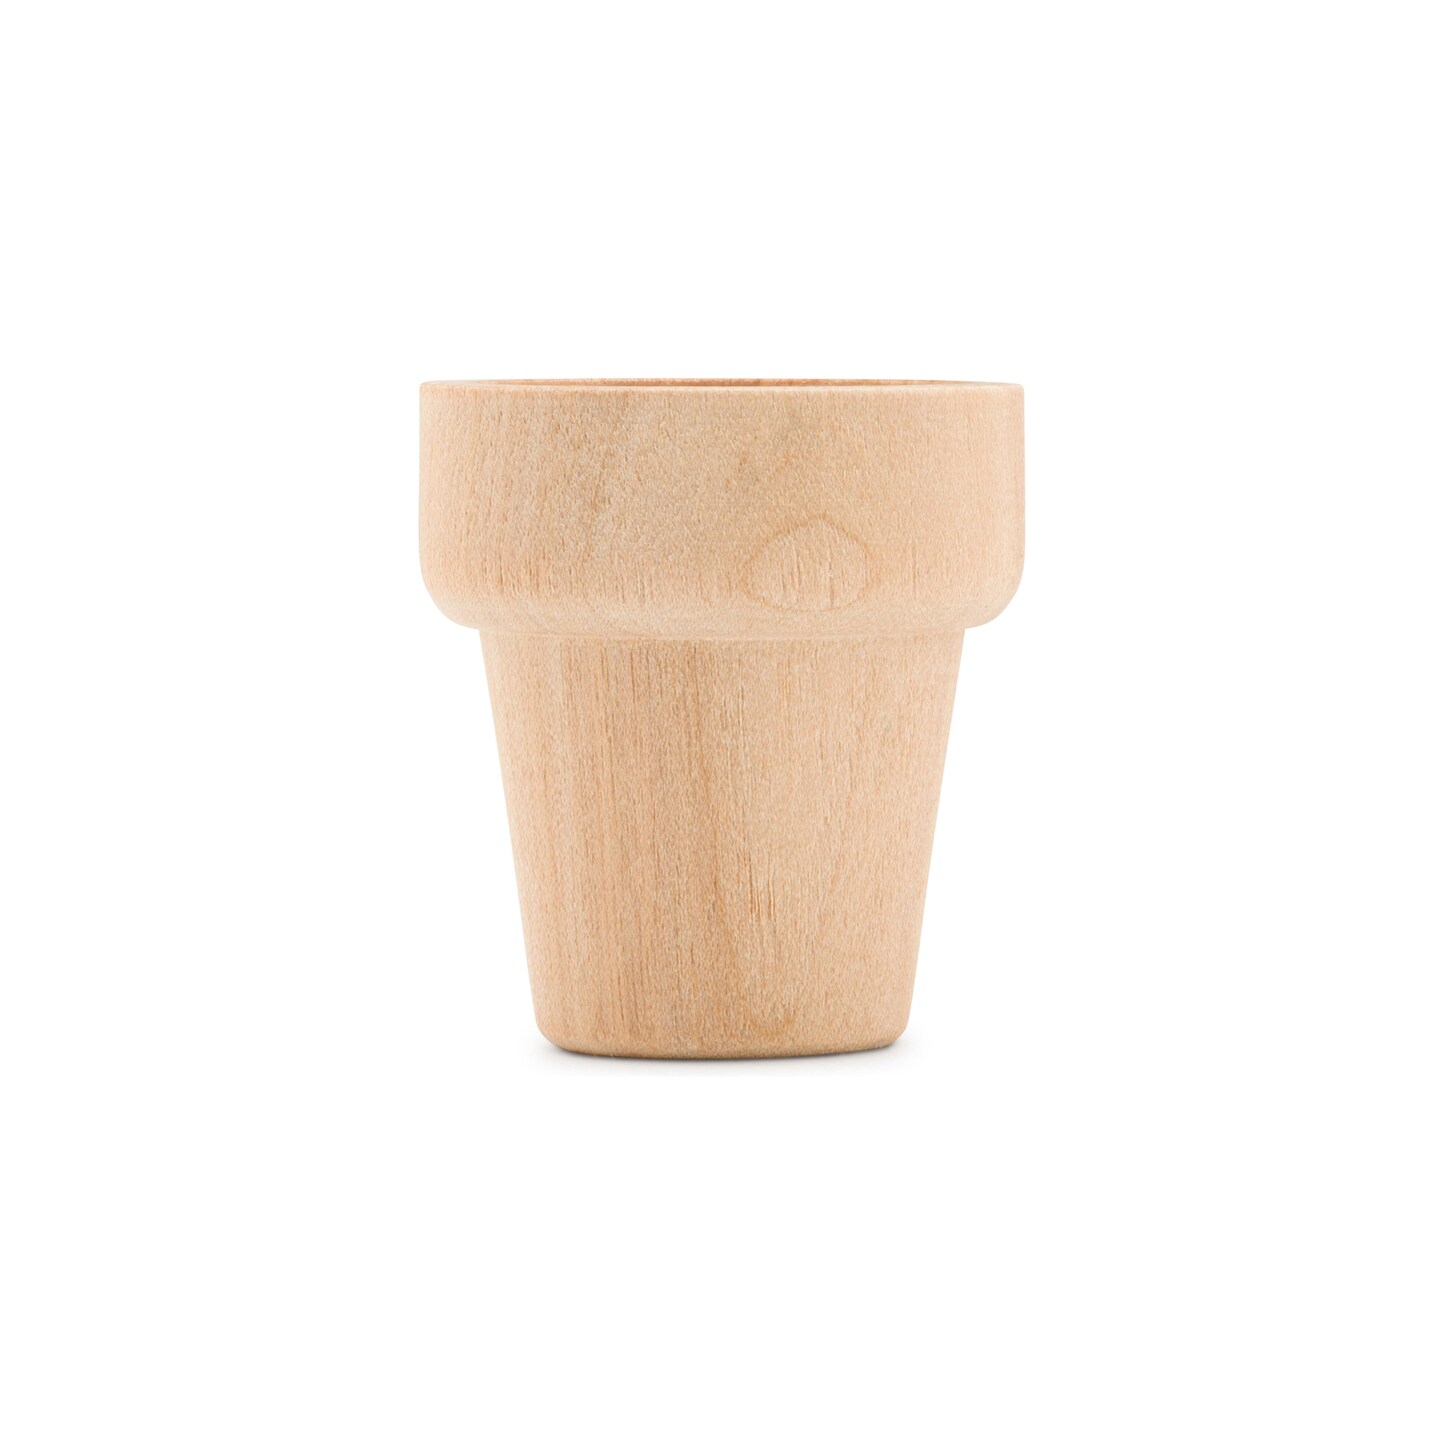 Small Craft Flower Pot, Multiple Sizes Available, Unfinished Wooden Flower Pot to Paint | Woodpeckers